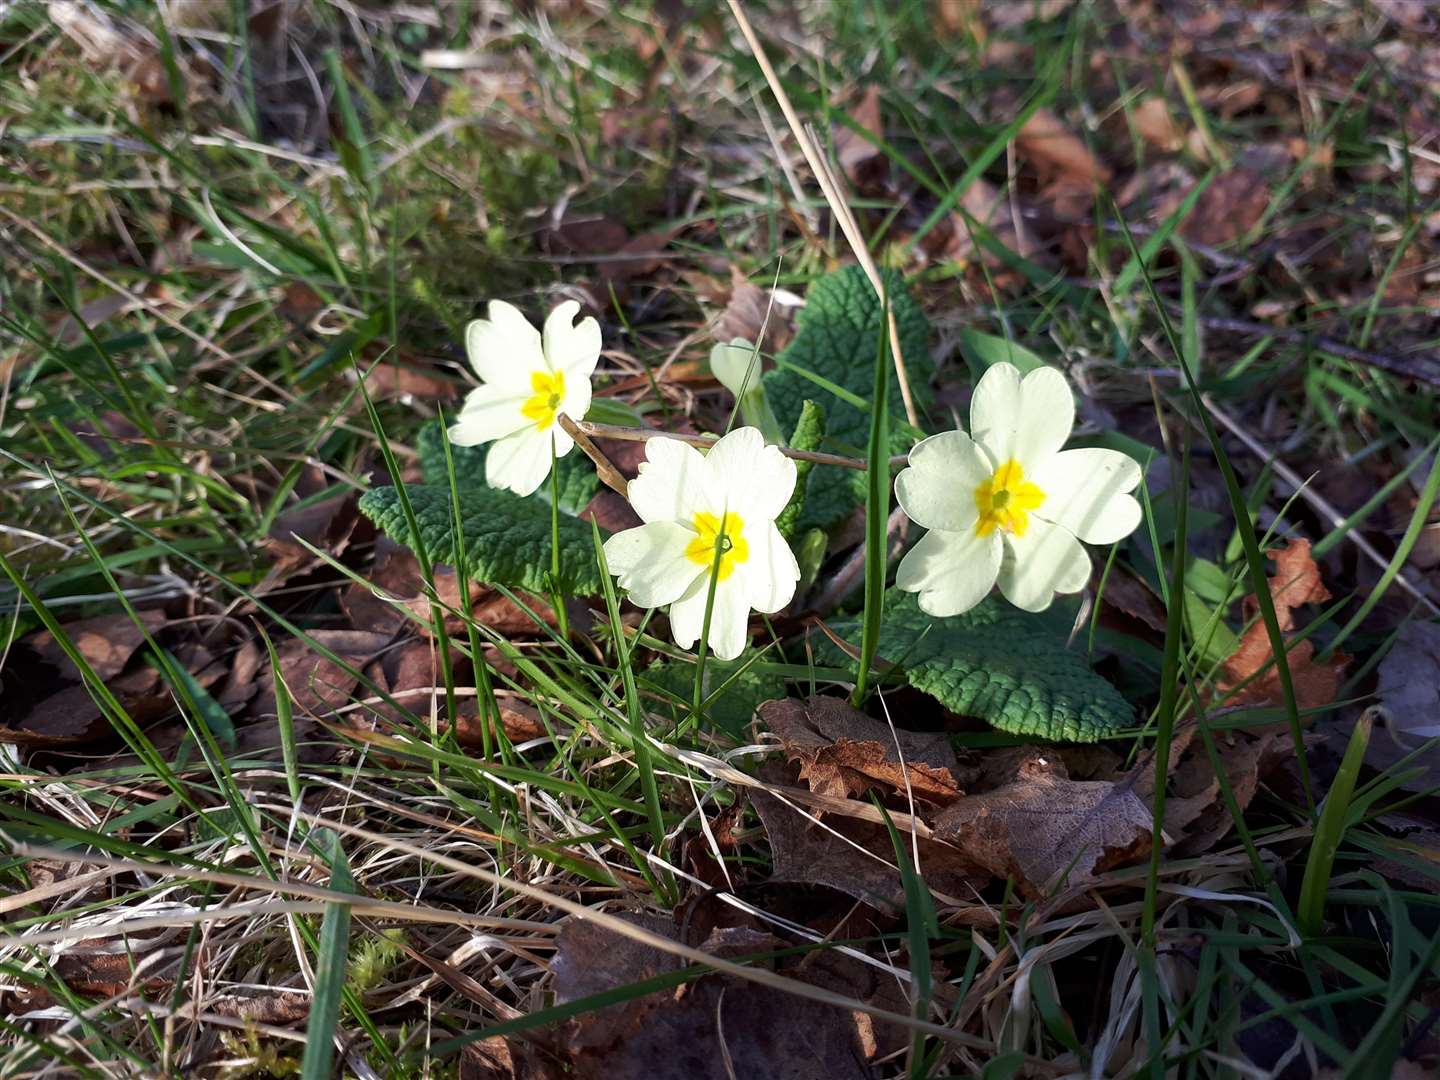 Primroses on a walk close to home during the first lockdown.